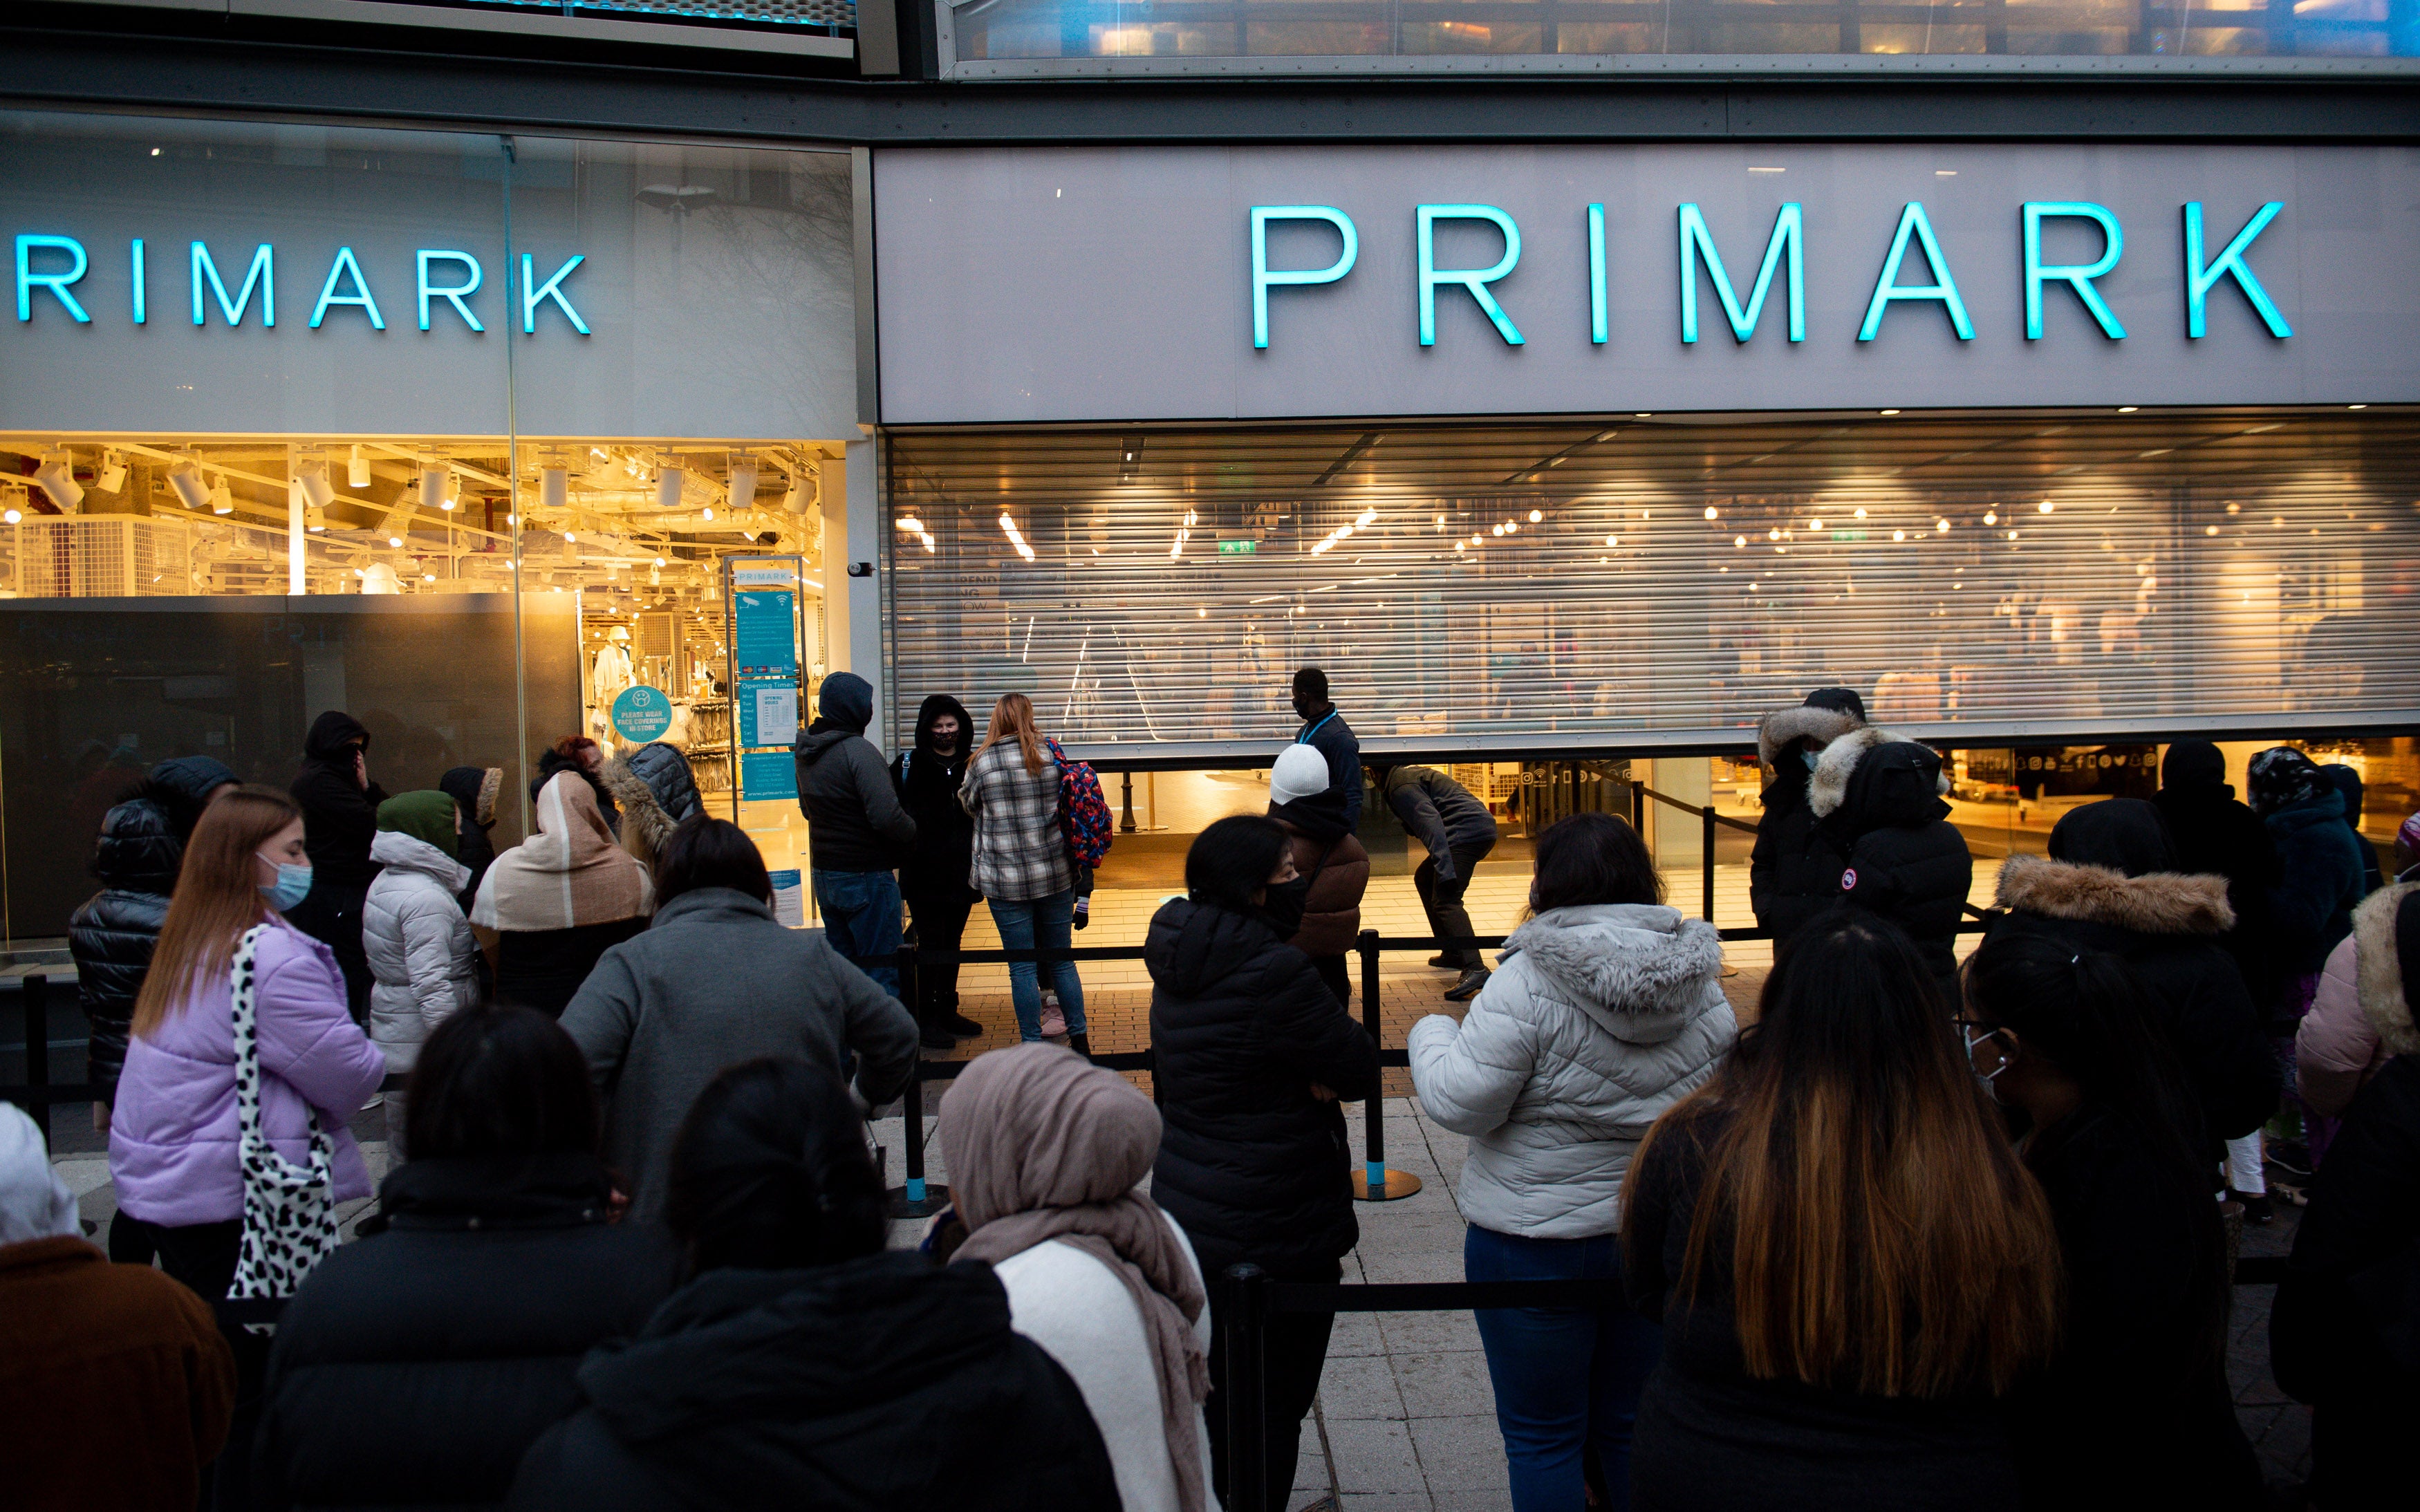 Latest Primark sales were below expectations after a dip in recent footfall (Jacob King/PA)